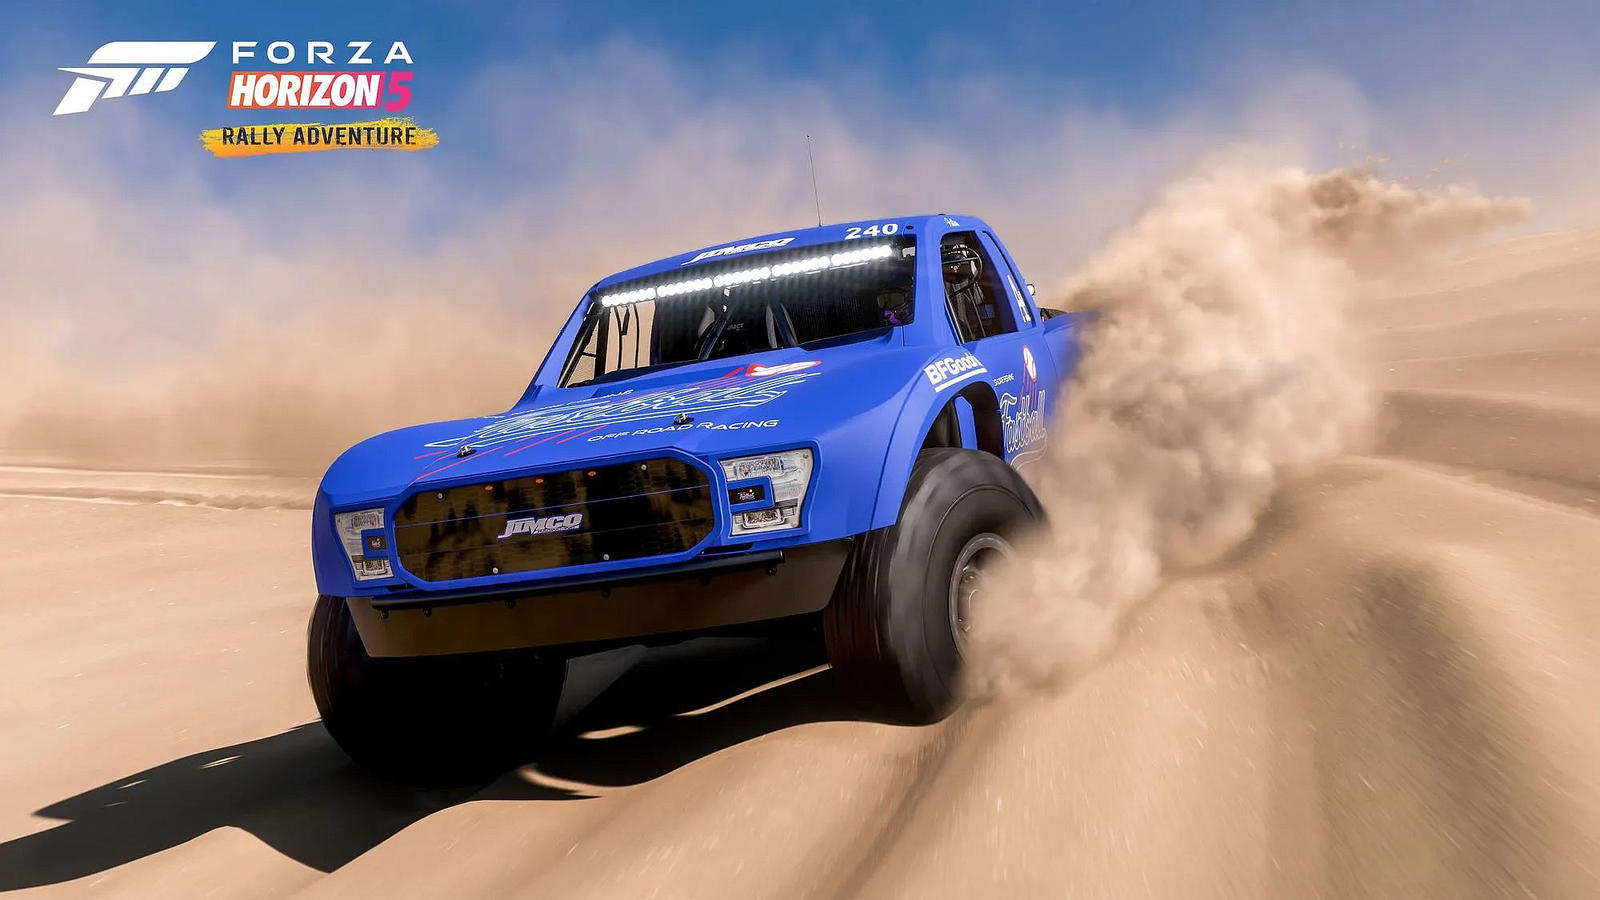 Forza Horizon 5 Series 6 Arrives on March 29 - Patch Notes